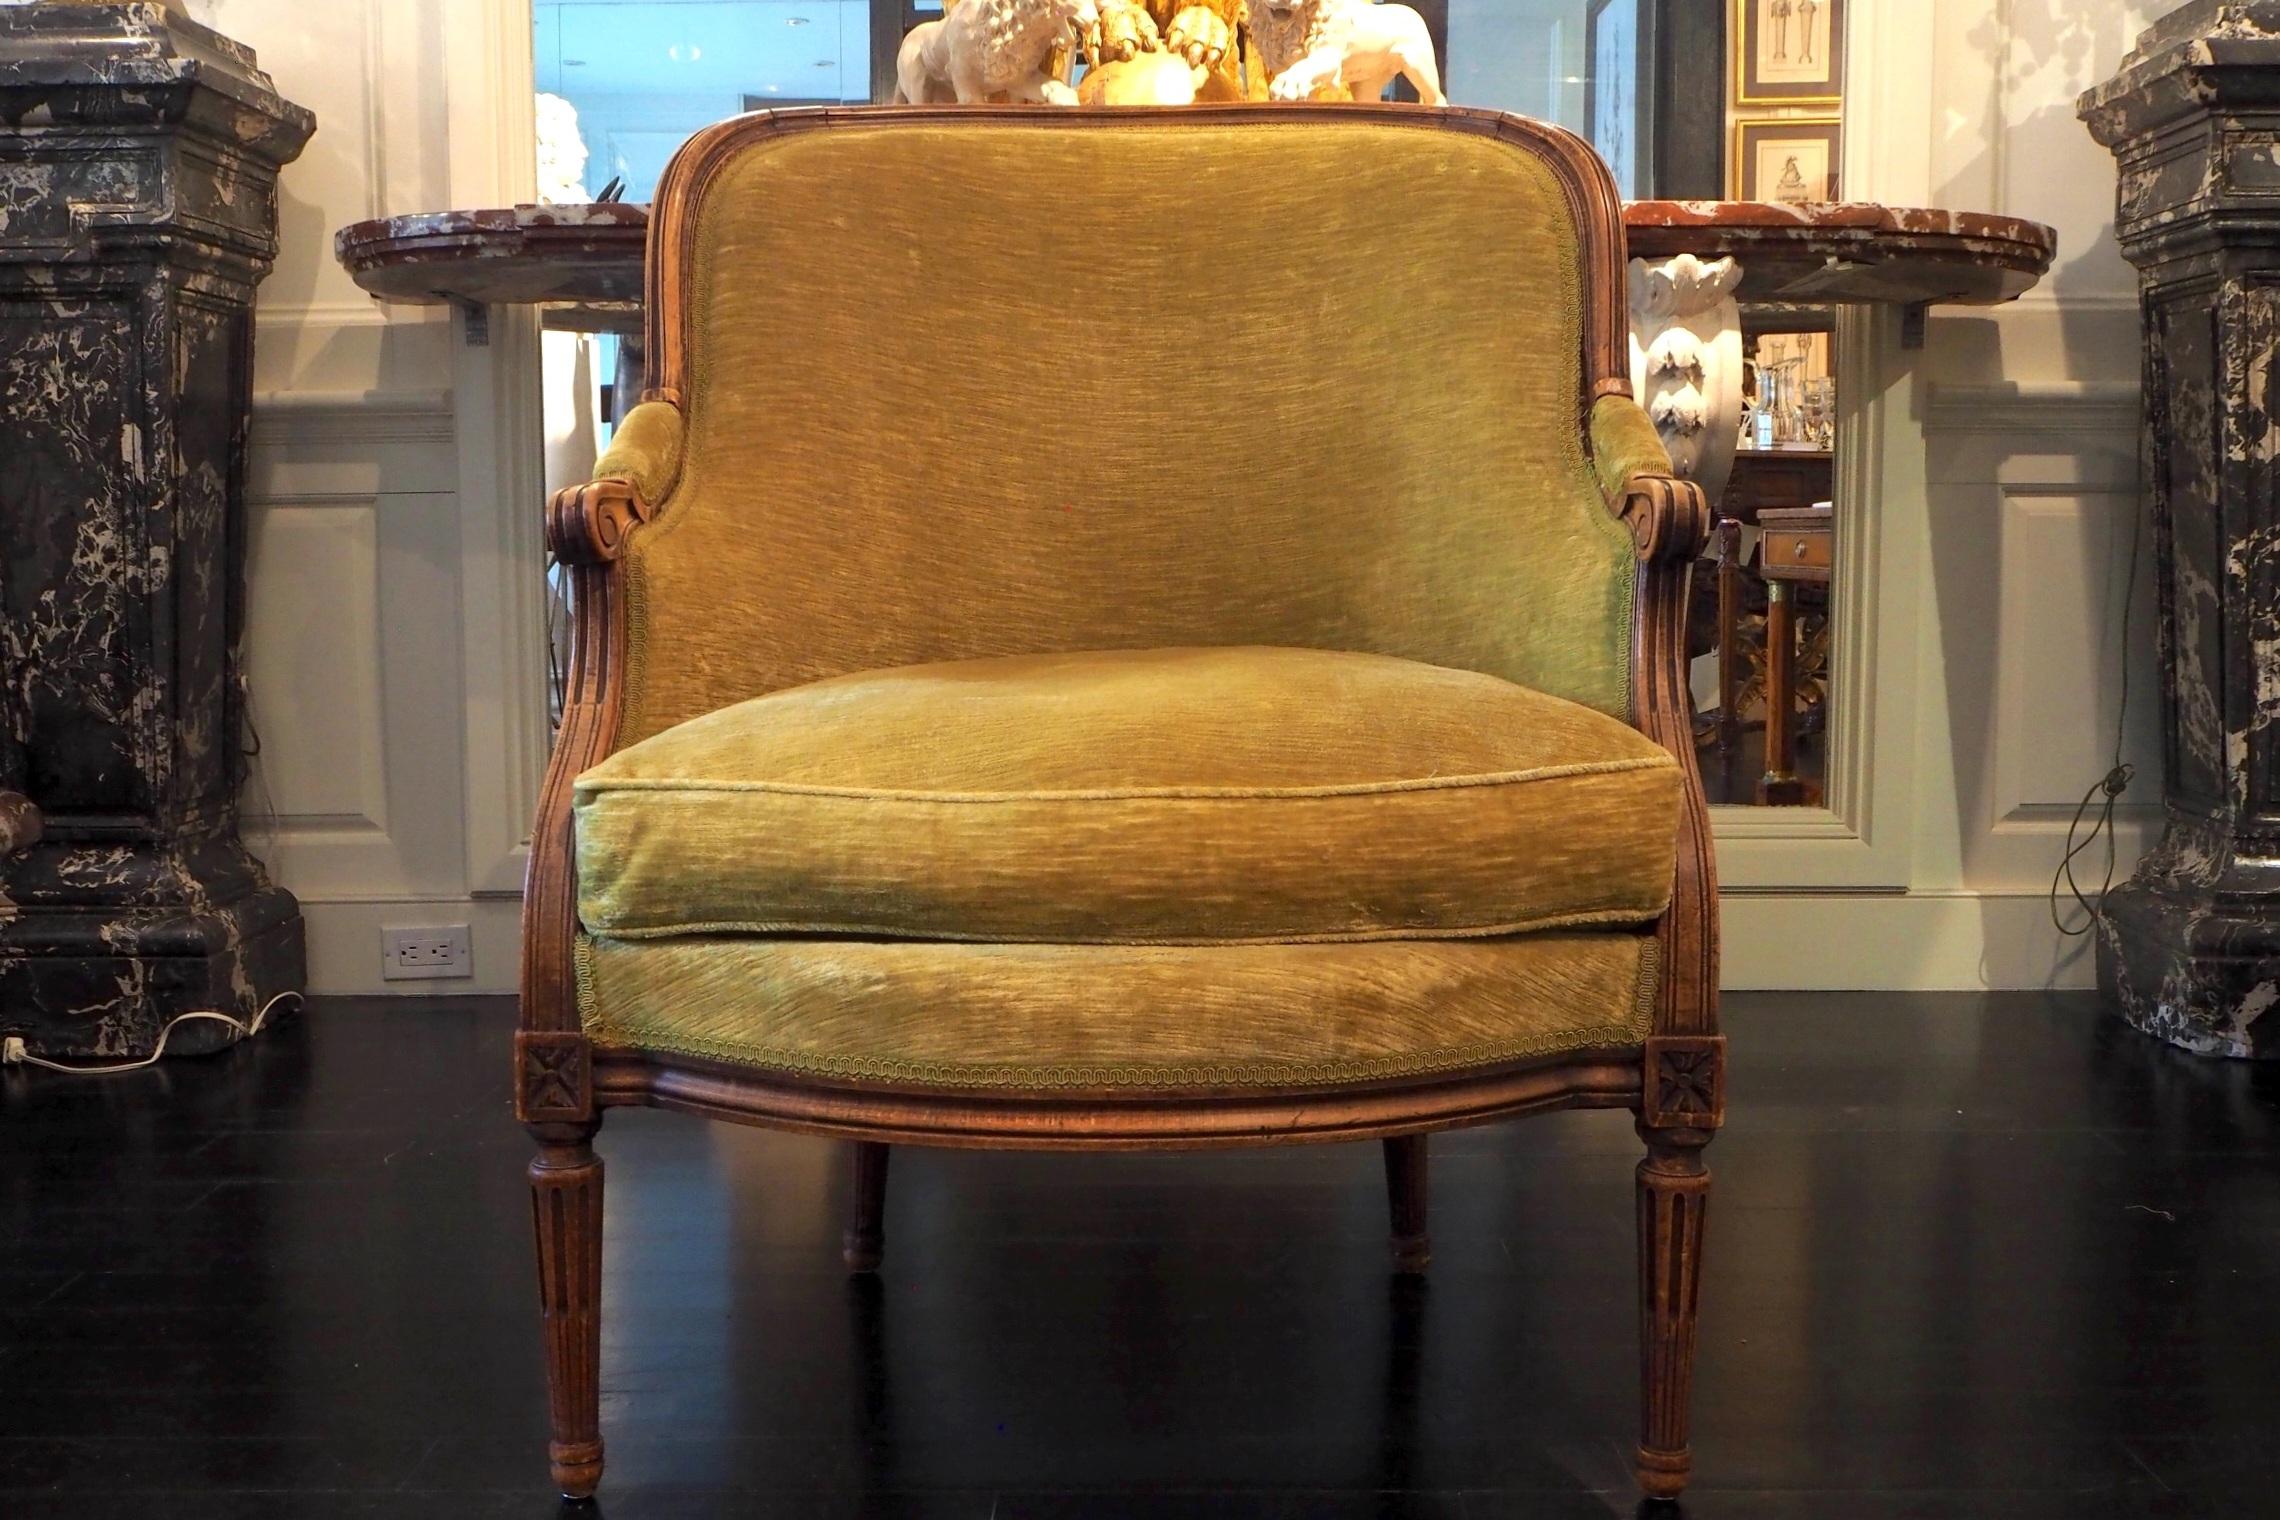 French Louis XVI style bergère armchair upholstered in sage green velvet, 19th century
Deep and comfortable, Classic French chic

Dimensions: 38